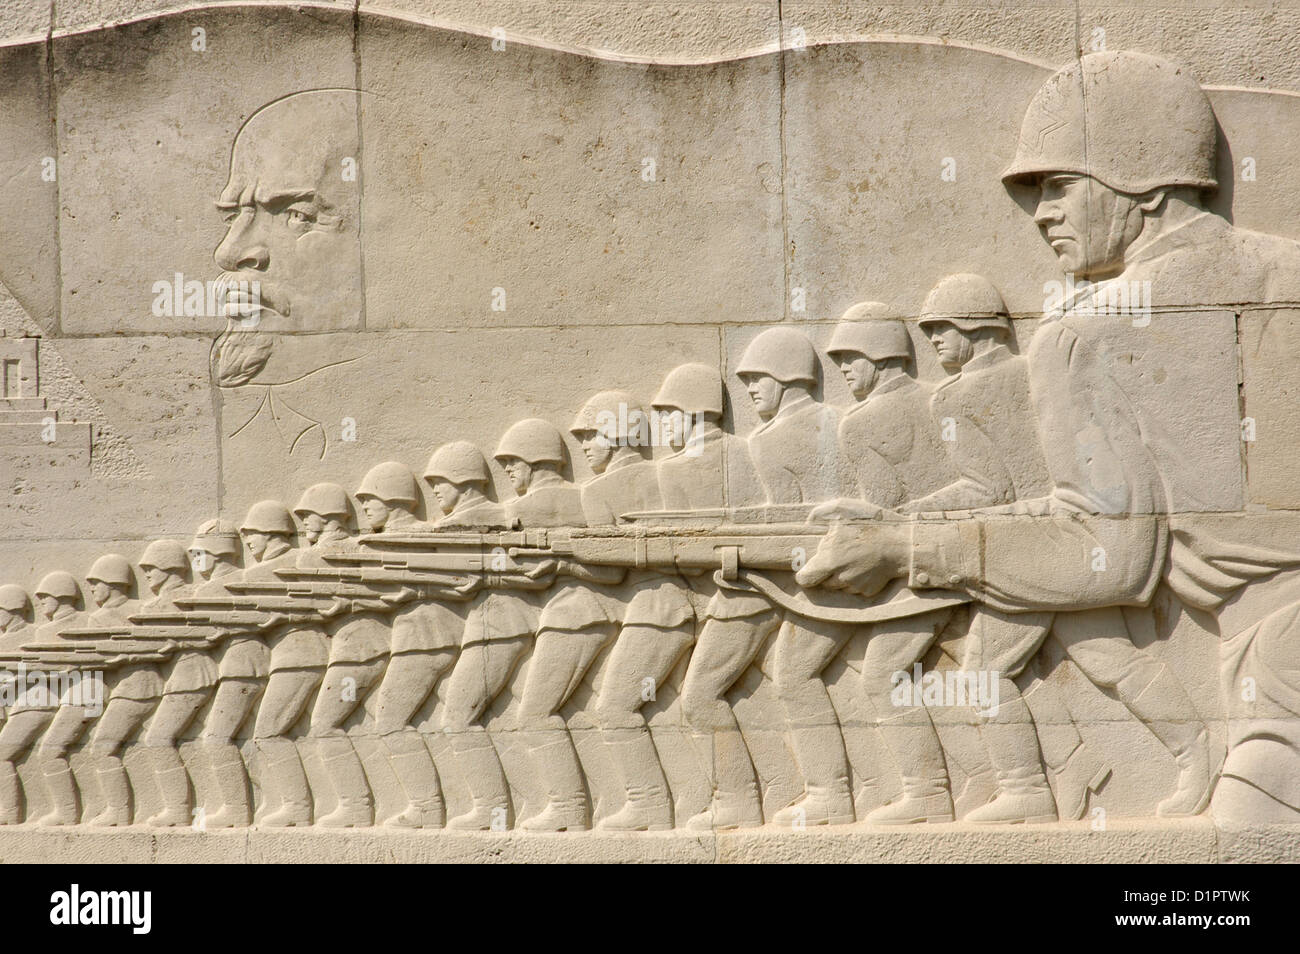 Sarcophagus with relief carving a military scene of soldiers of the Red Army and portrait of Lenin. Treptower Park. Berlin. Stock Photo